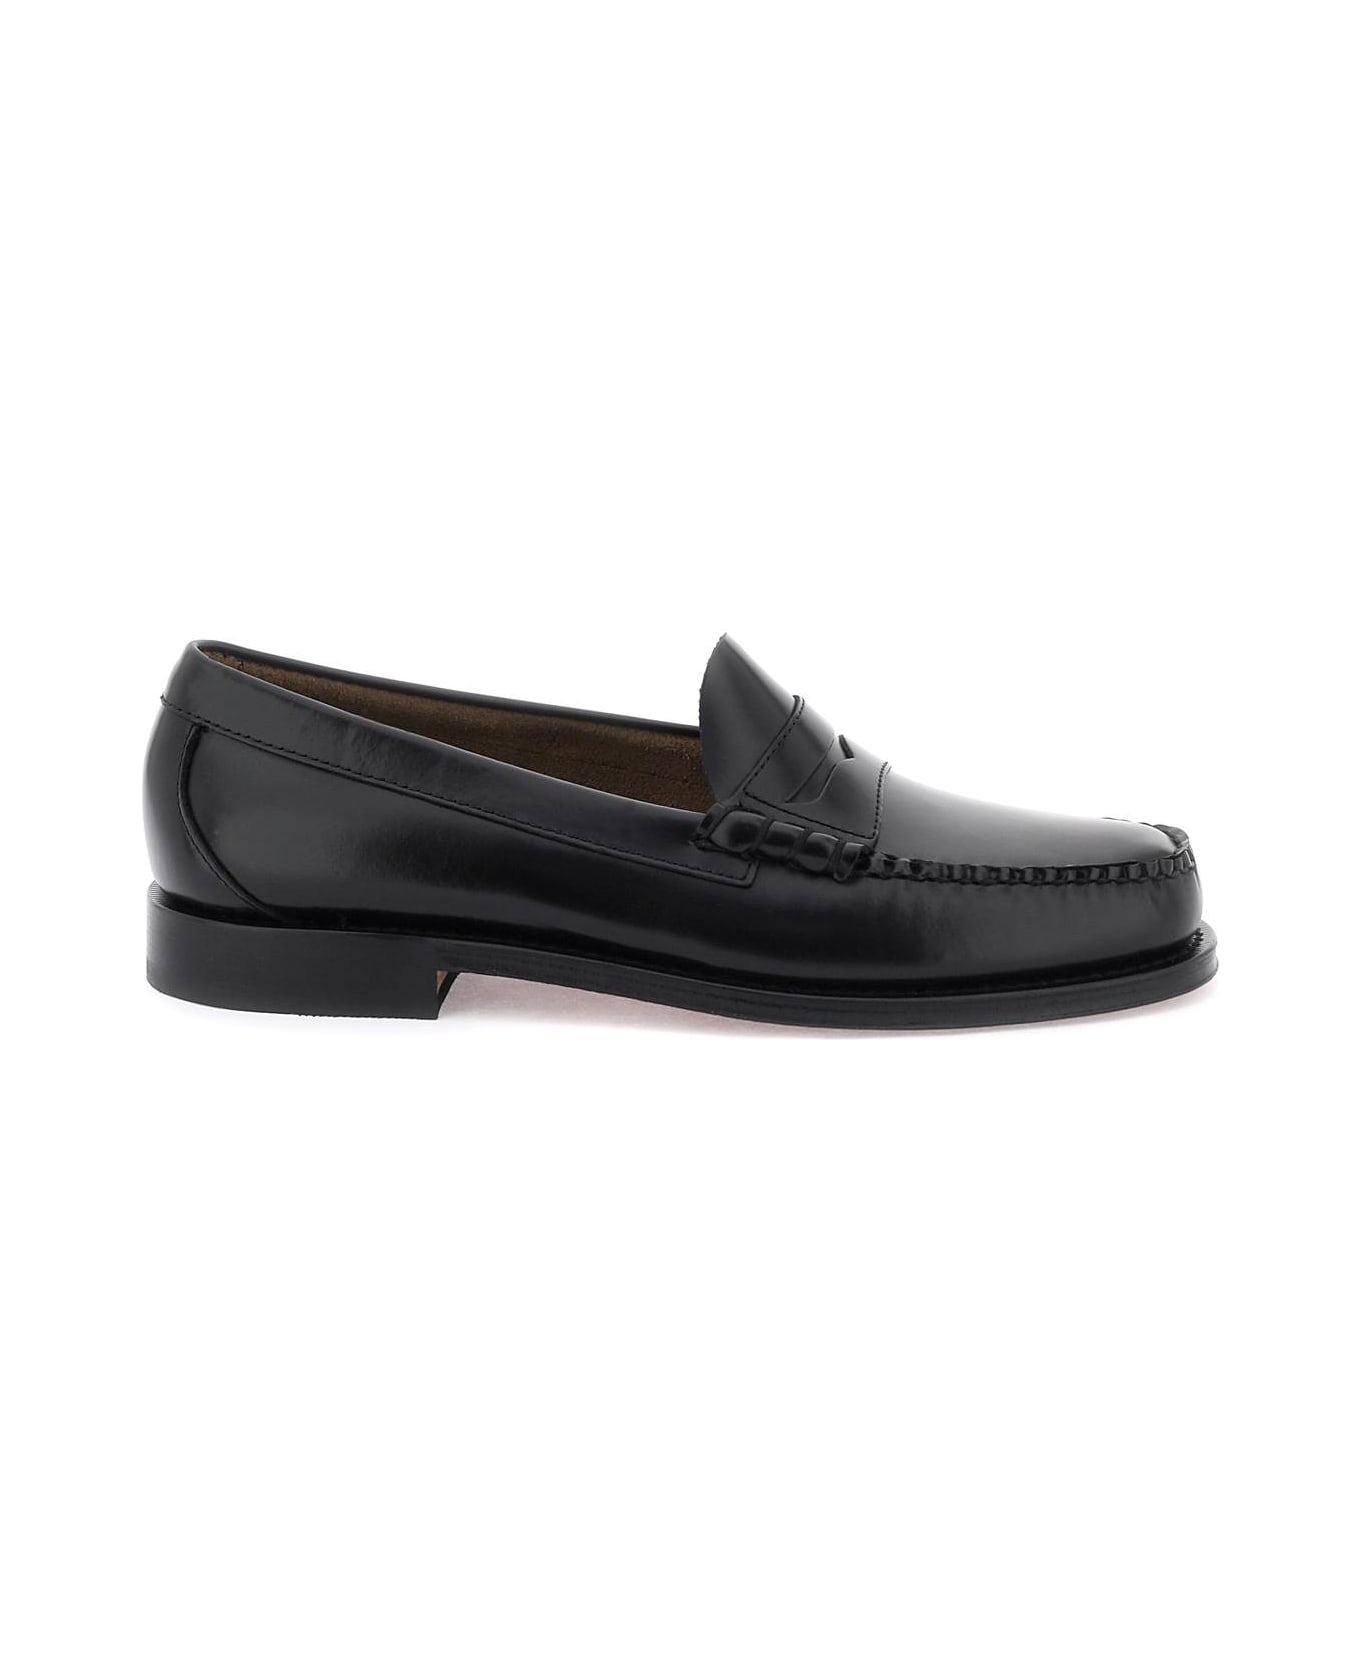 G.H.Bass & Co. 'weejuns Larson' Penny Loafers - Black ローファー＆デッキシューズ